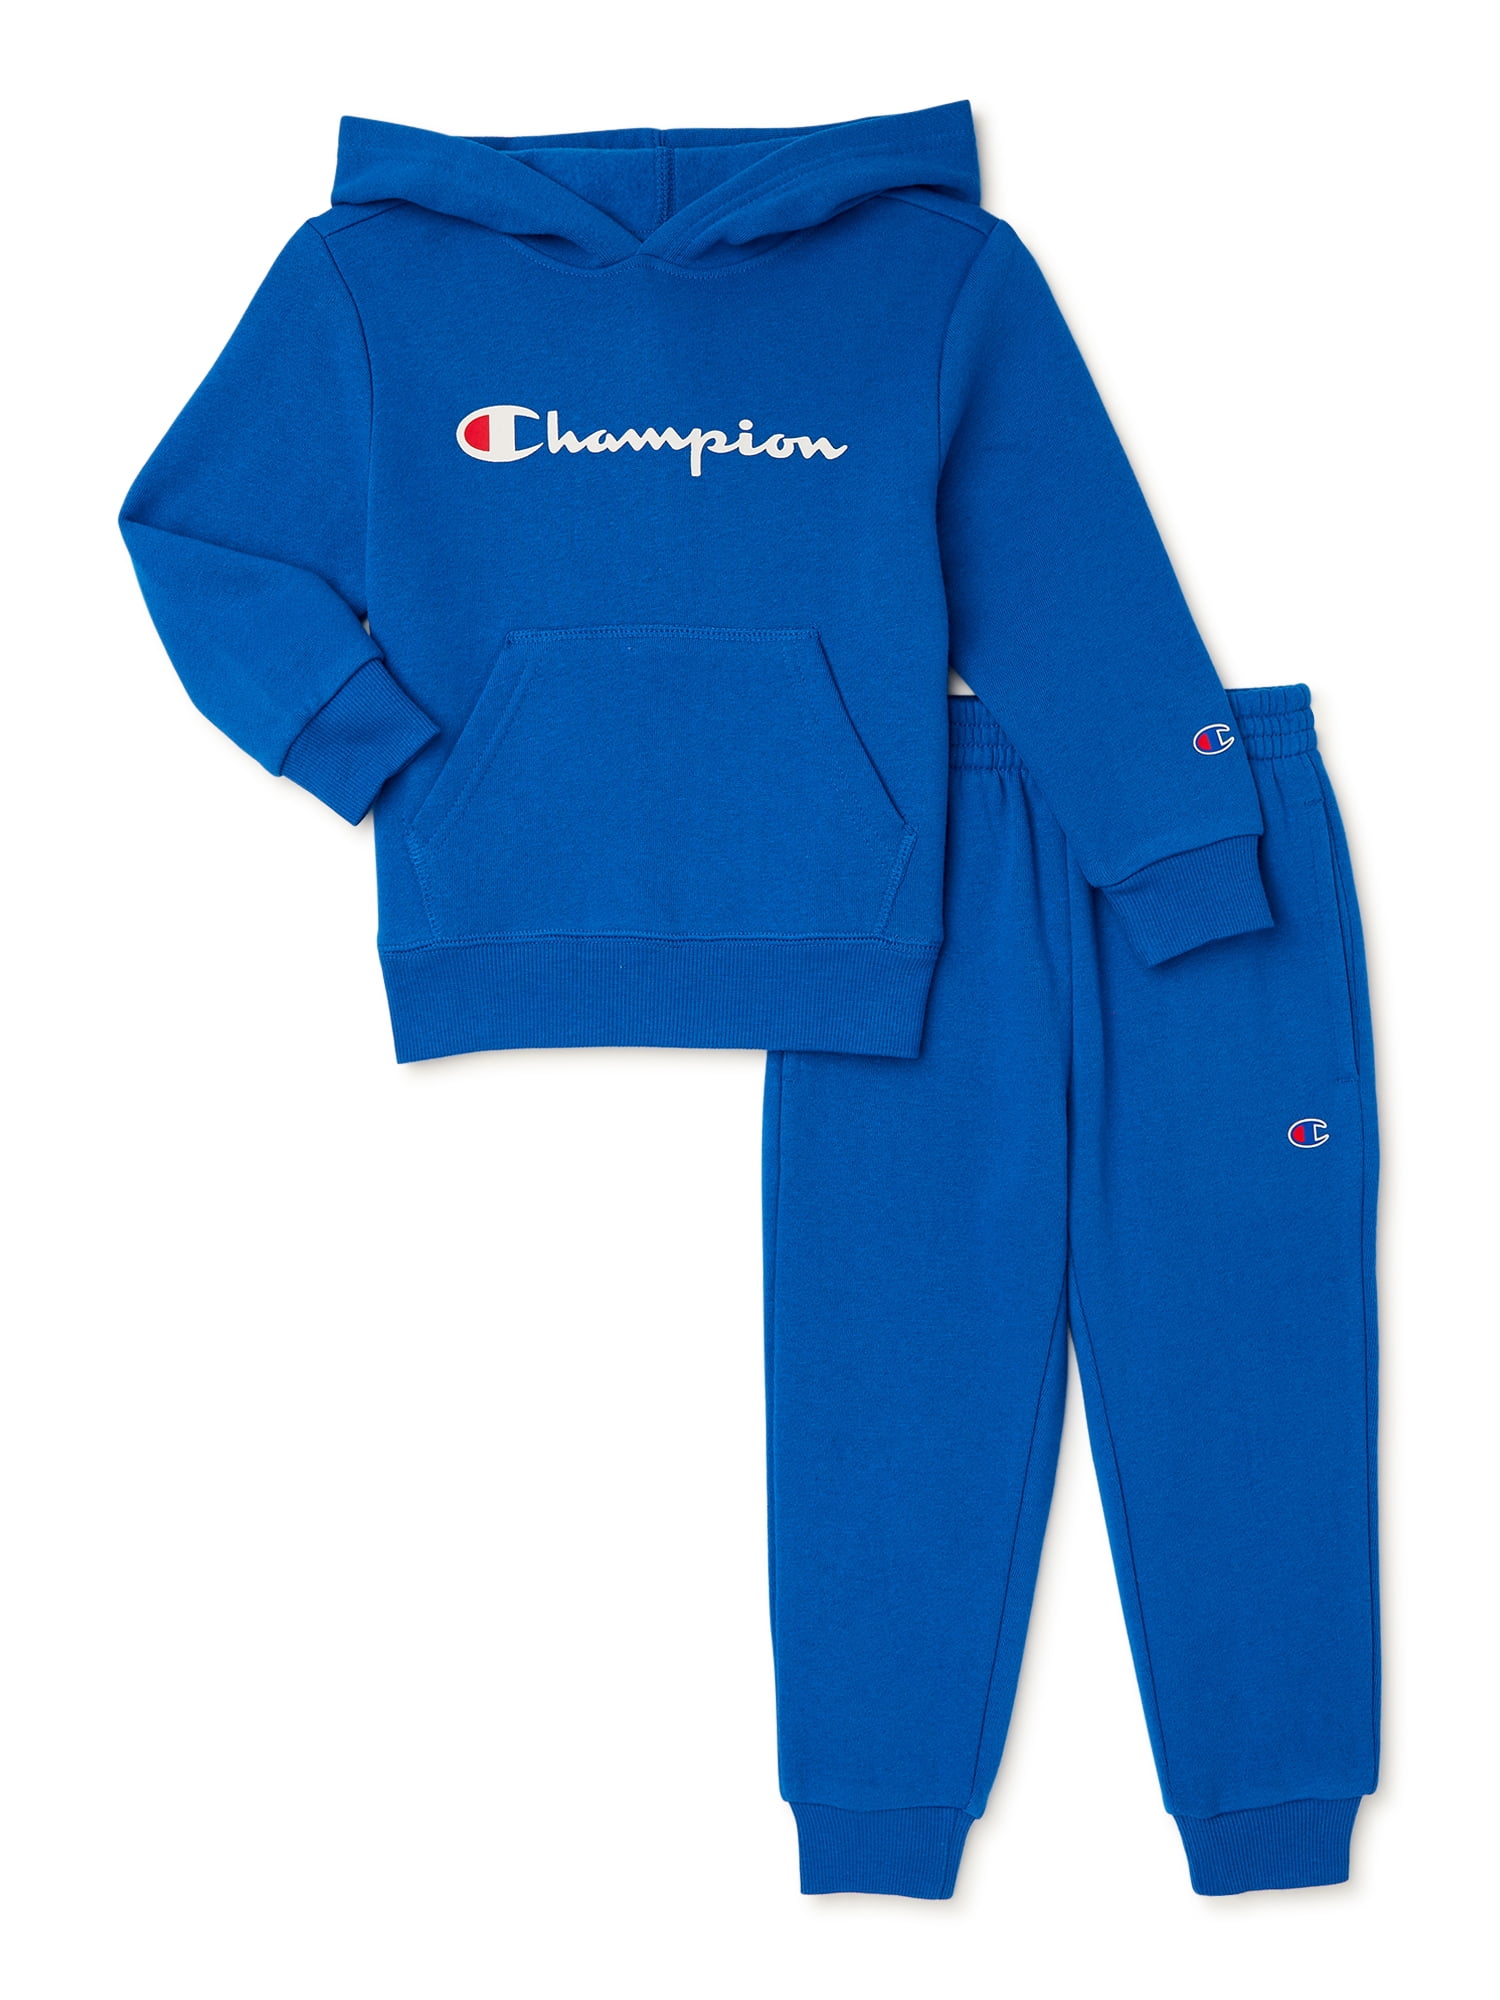 LittleSpring Little Boys Tracksuit Zip Up Athletic Hoodie and Jogger Pants 2-Piece Set